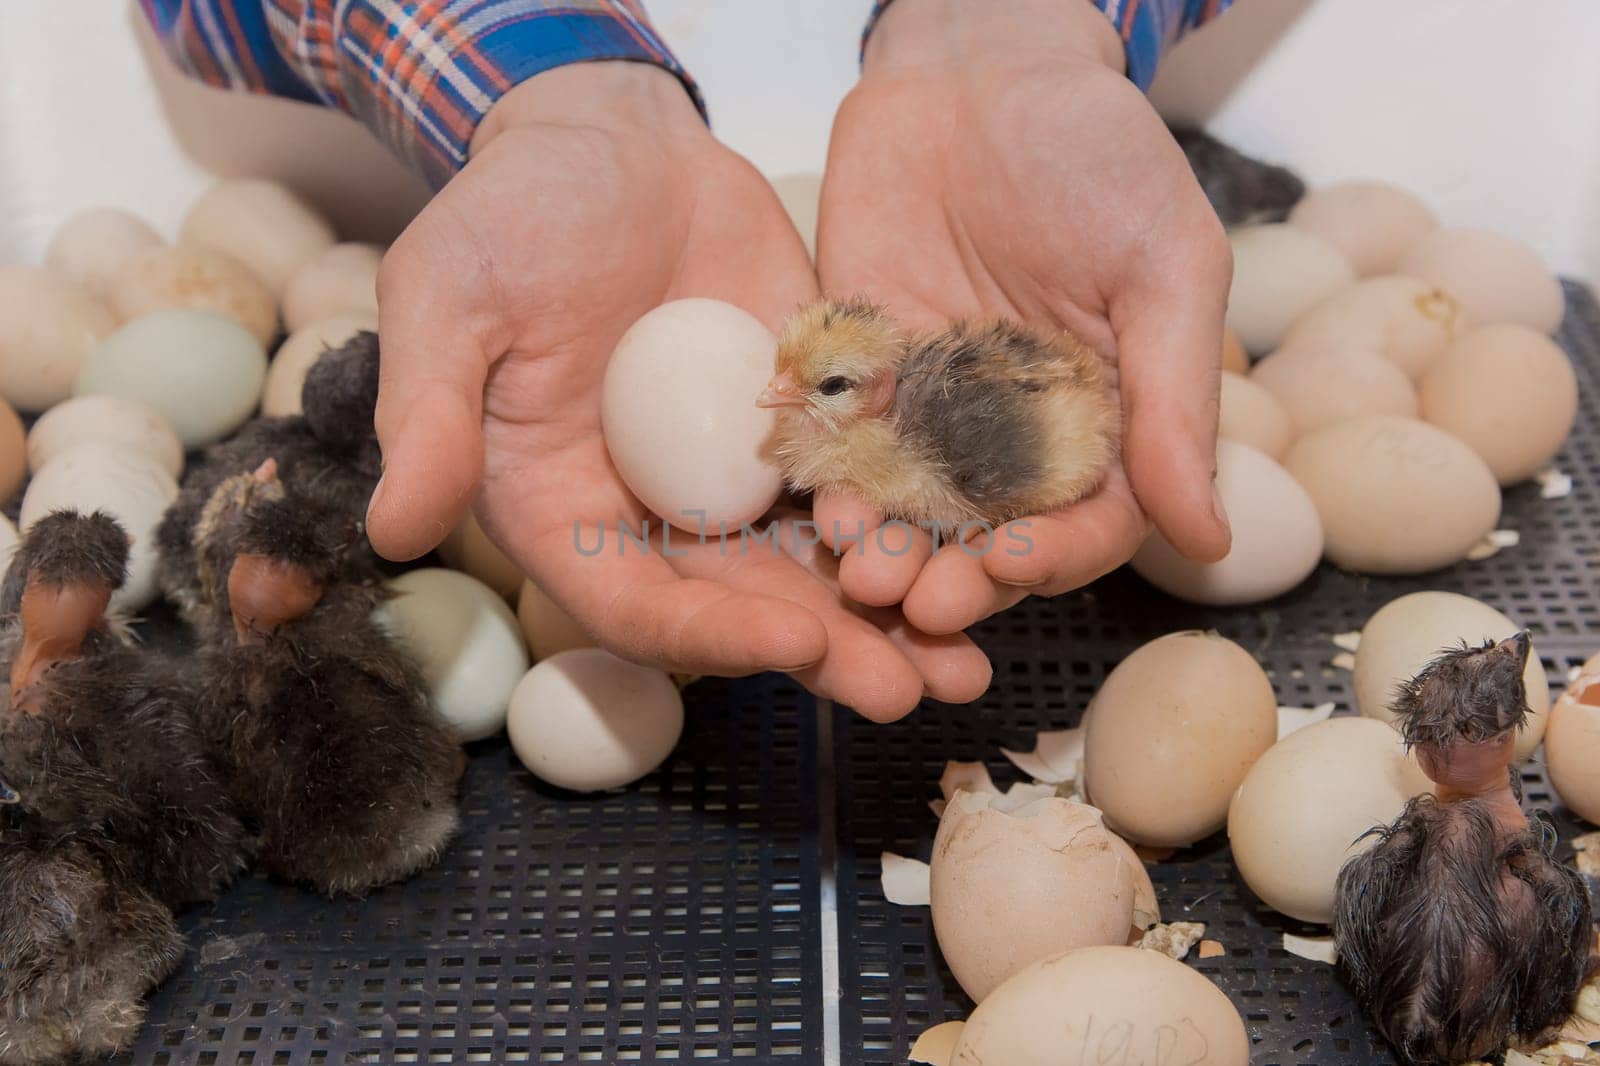 The hands of a male farmer hold a chicken egg and a small fluffy chick next to an incubation in an incubator by AYDO8